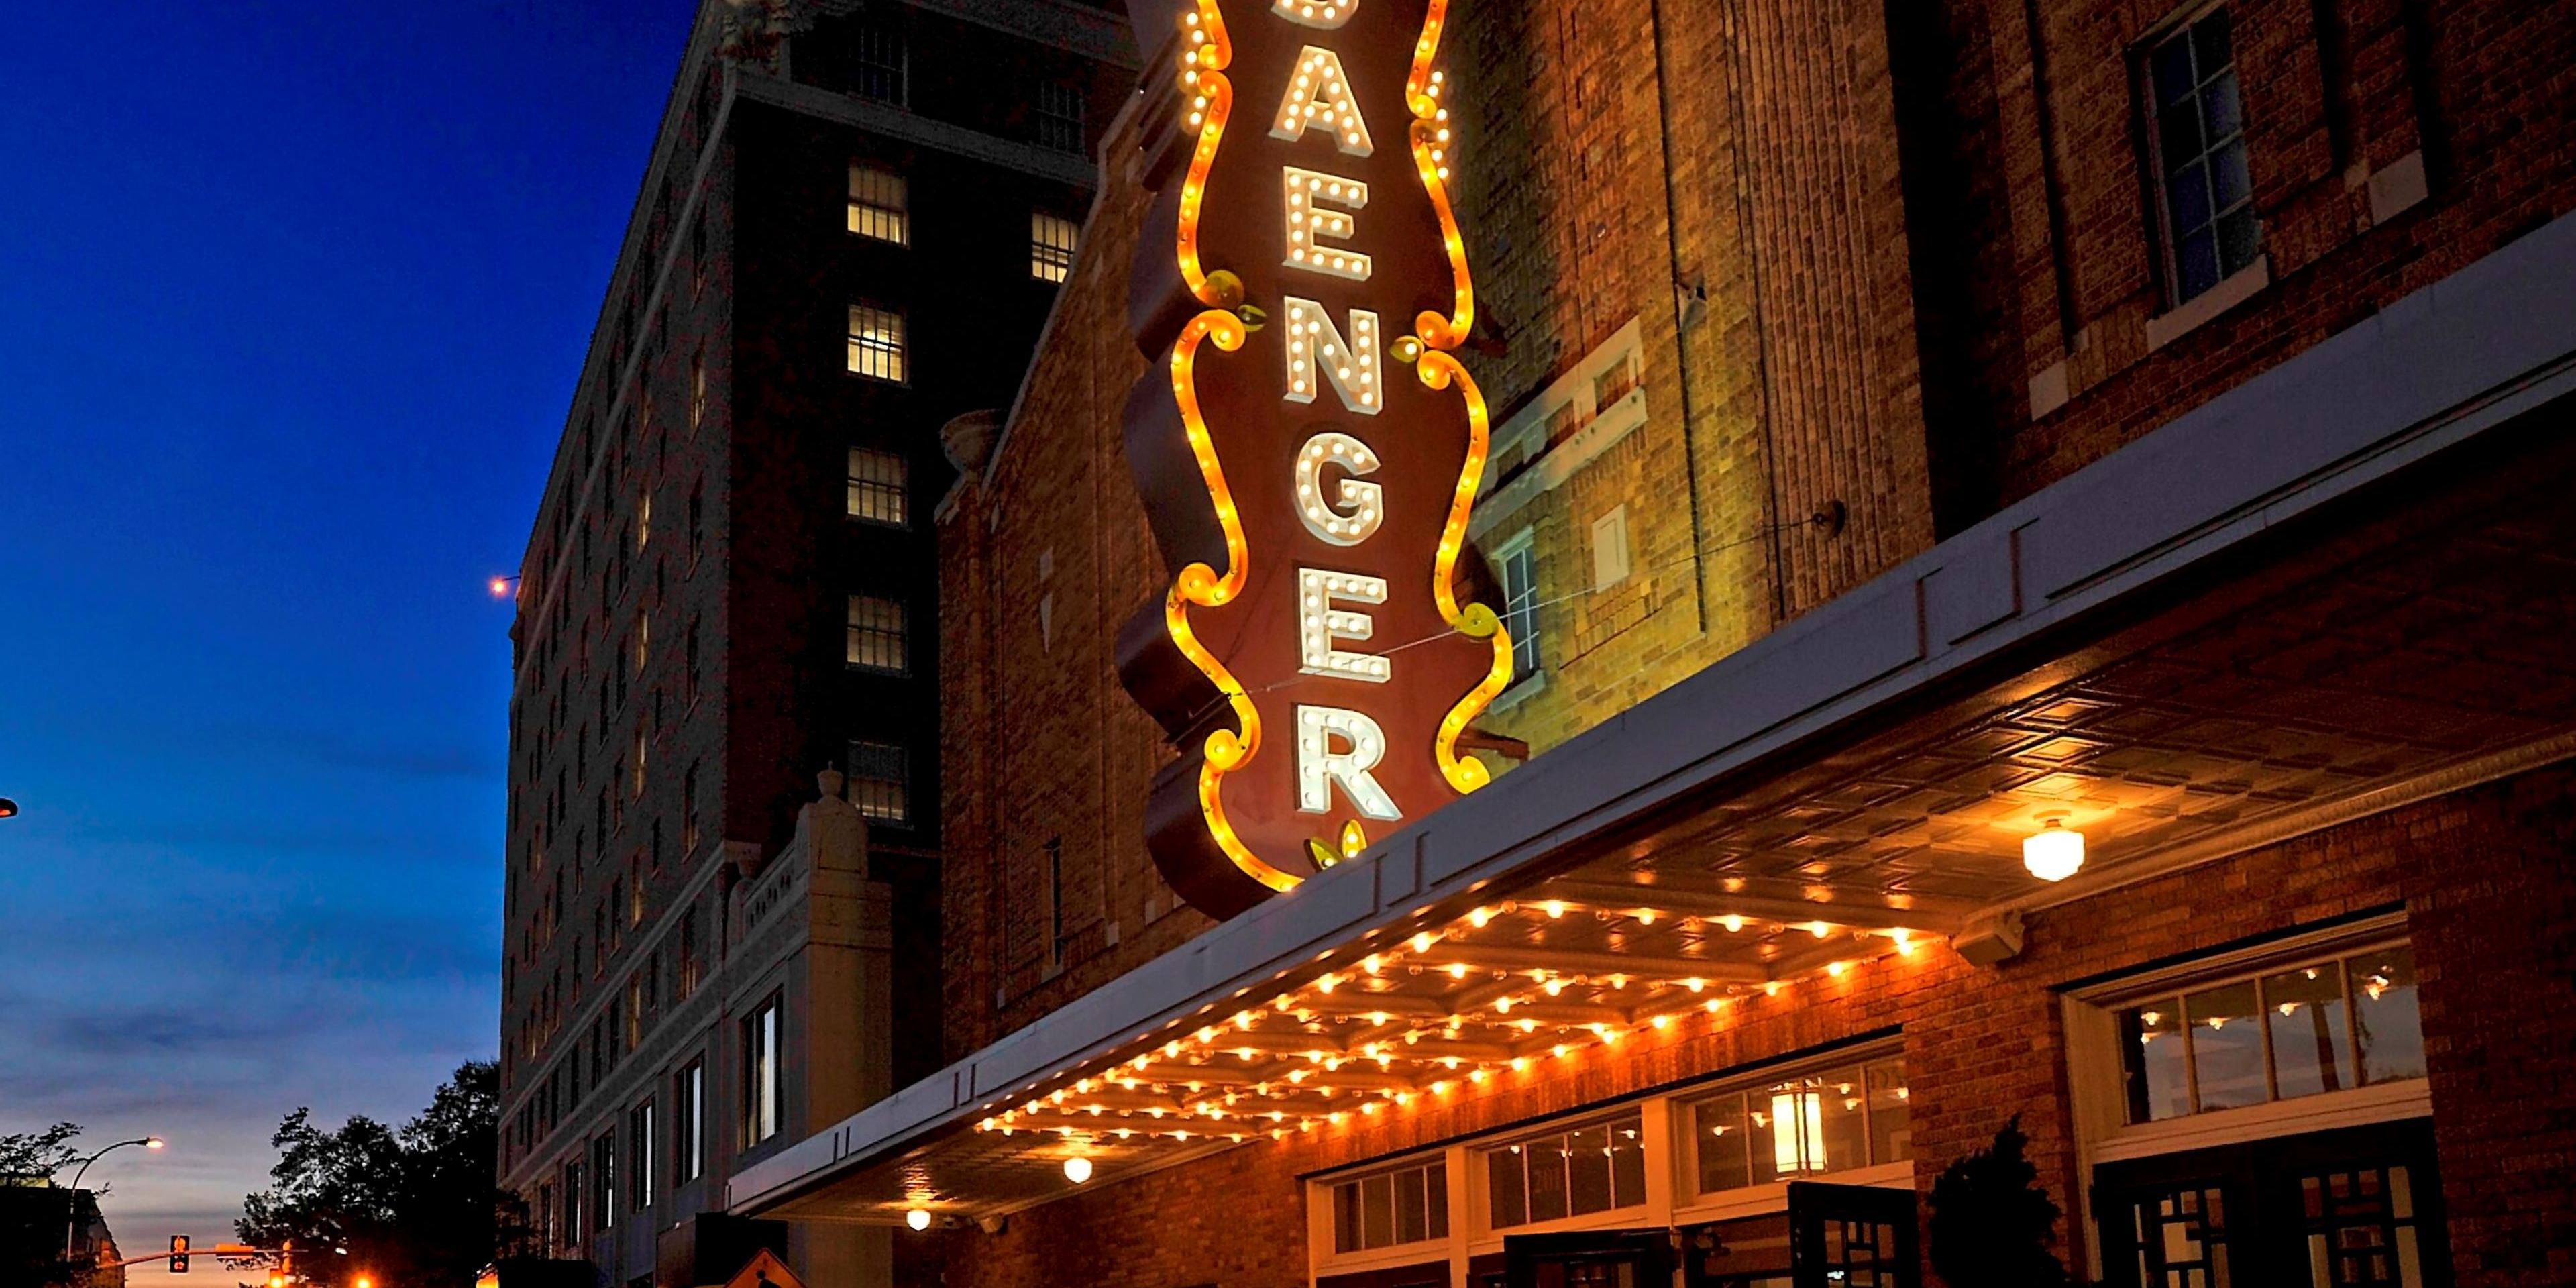 Stay at the Holiday Inn Express Hattiesburg West - Univ Area while attending an event at the historic Hattiesburg Saenger Theater. 